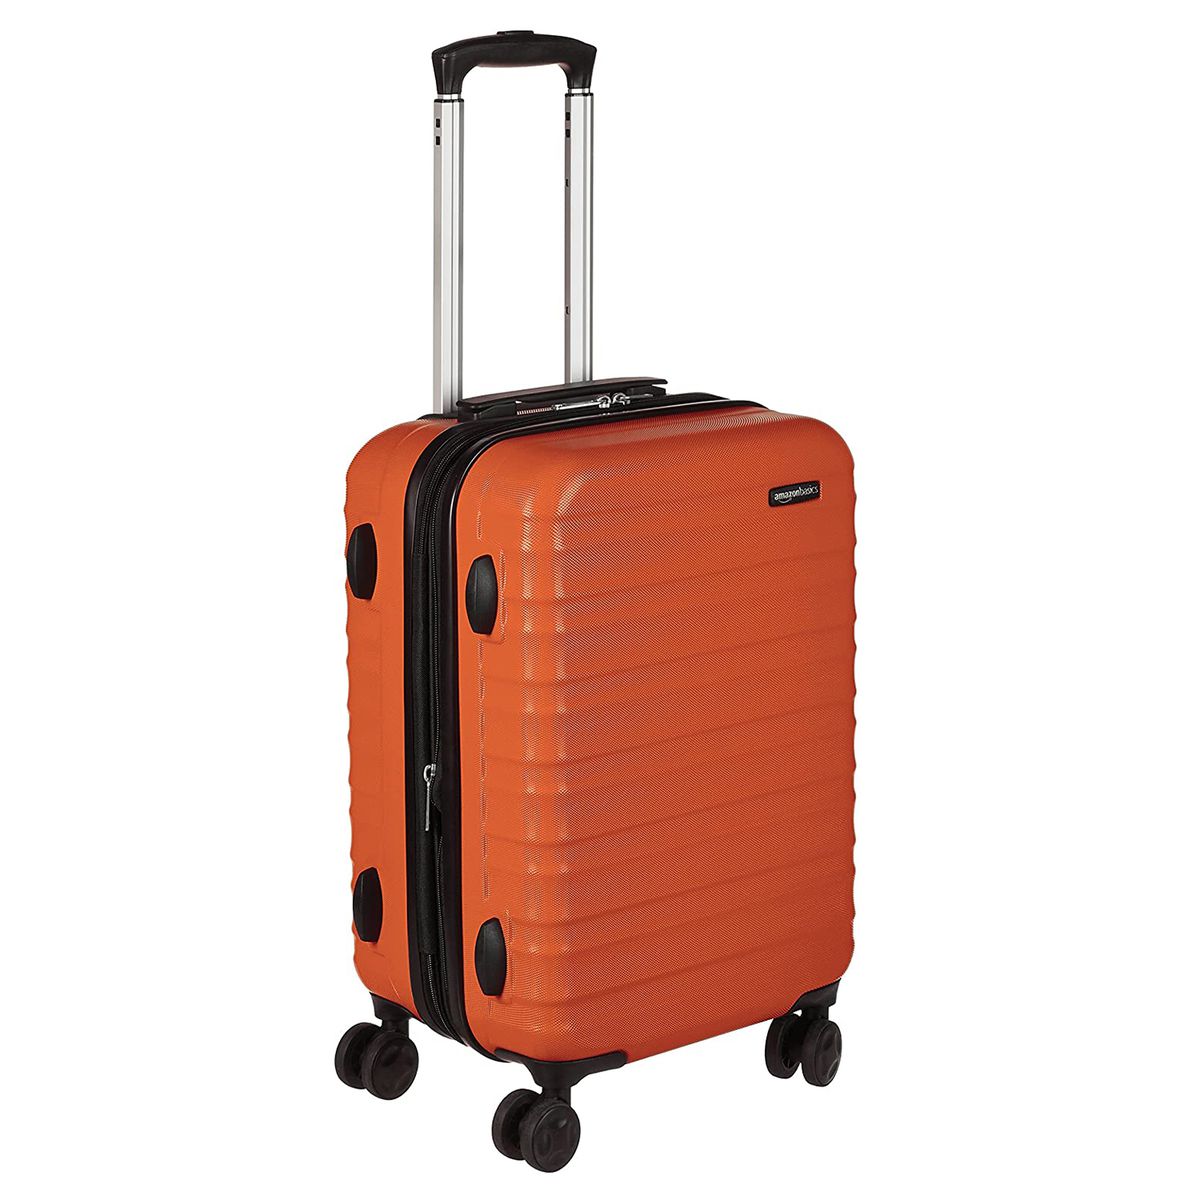 Tjtz All Aluminum Frame 21 inch Trolley case Gift Suitcase Universal Wheel Suitcase Color : Black, Size : 21